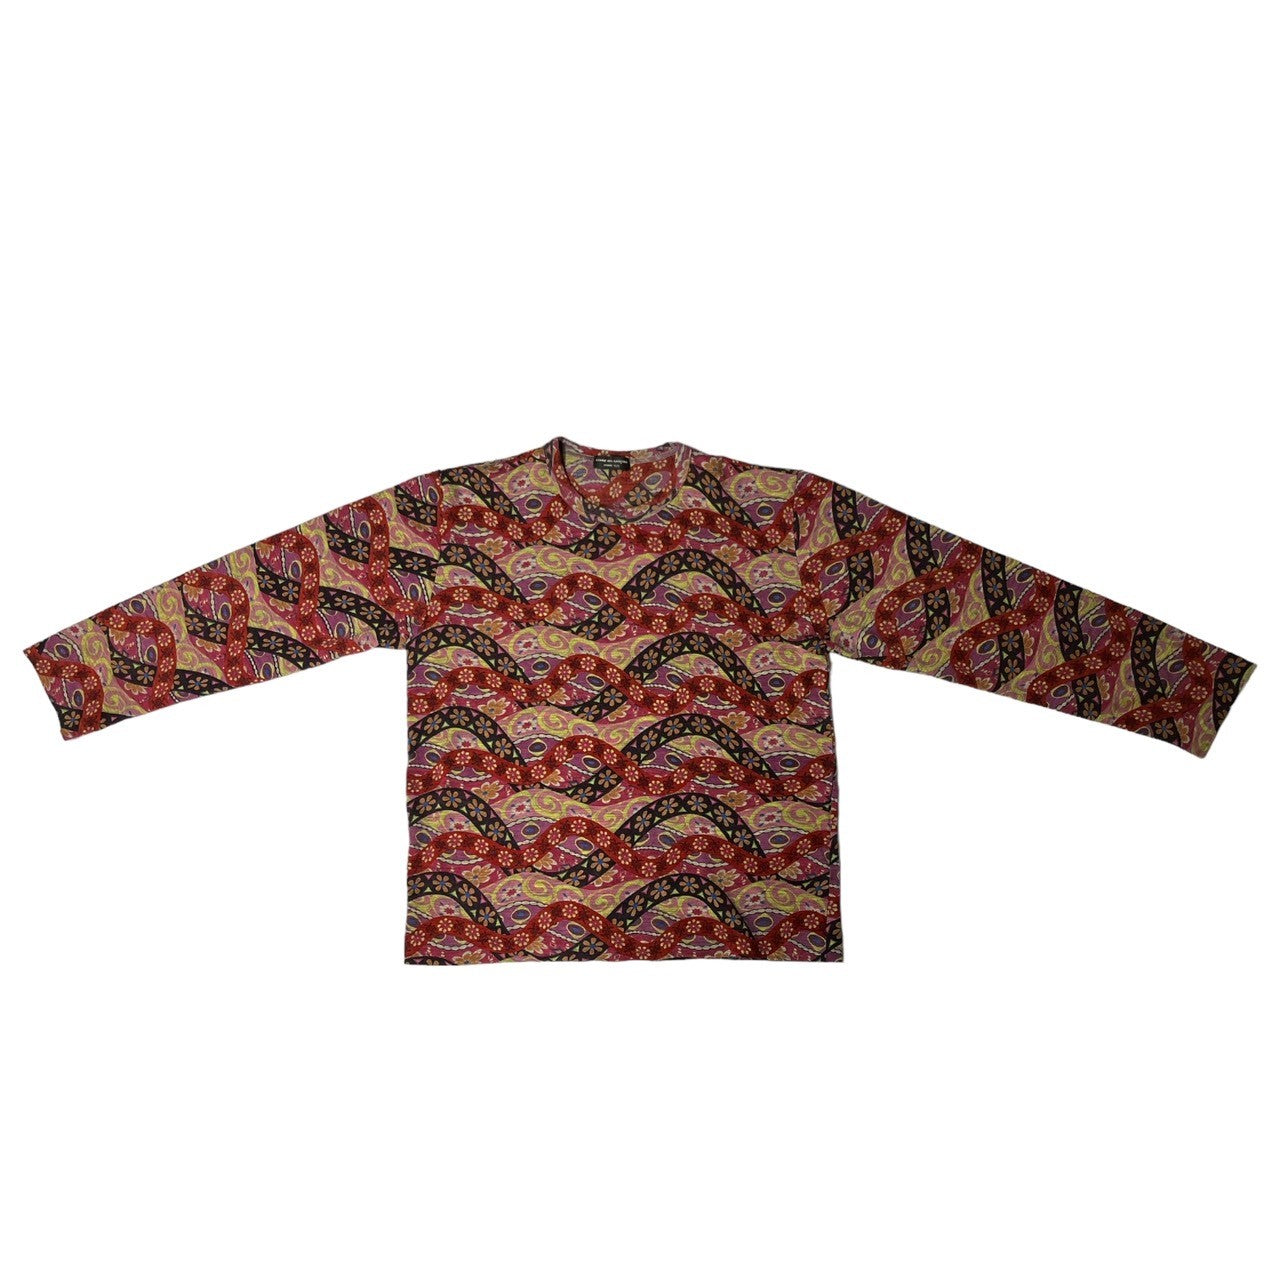 COMME des GARCONS HOMME PLUS(コムデギャルソンオムプリュス) 01AW  Flower pattern wool cut and sew フラワー パターン ウール 長袖 カットソー Tシャツ PC-T025 表記無し(M~L程度) ピンク×レッド AD2001